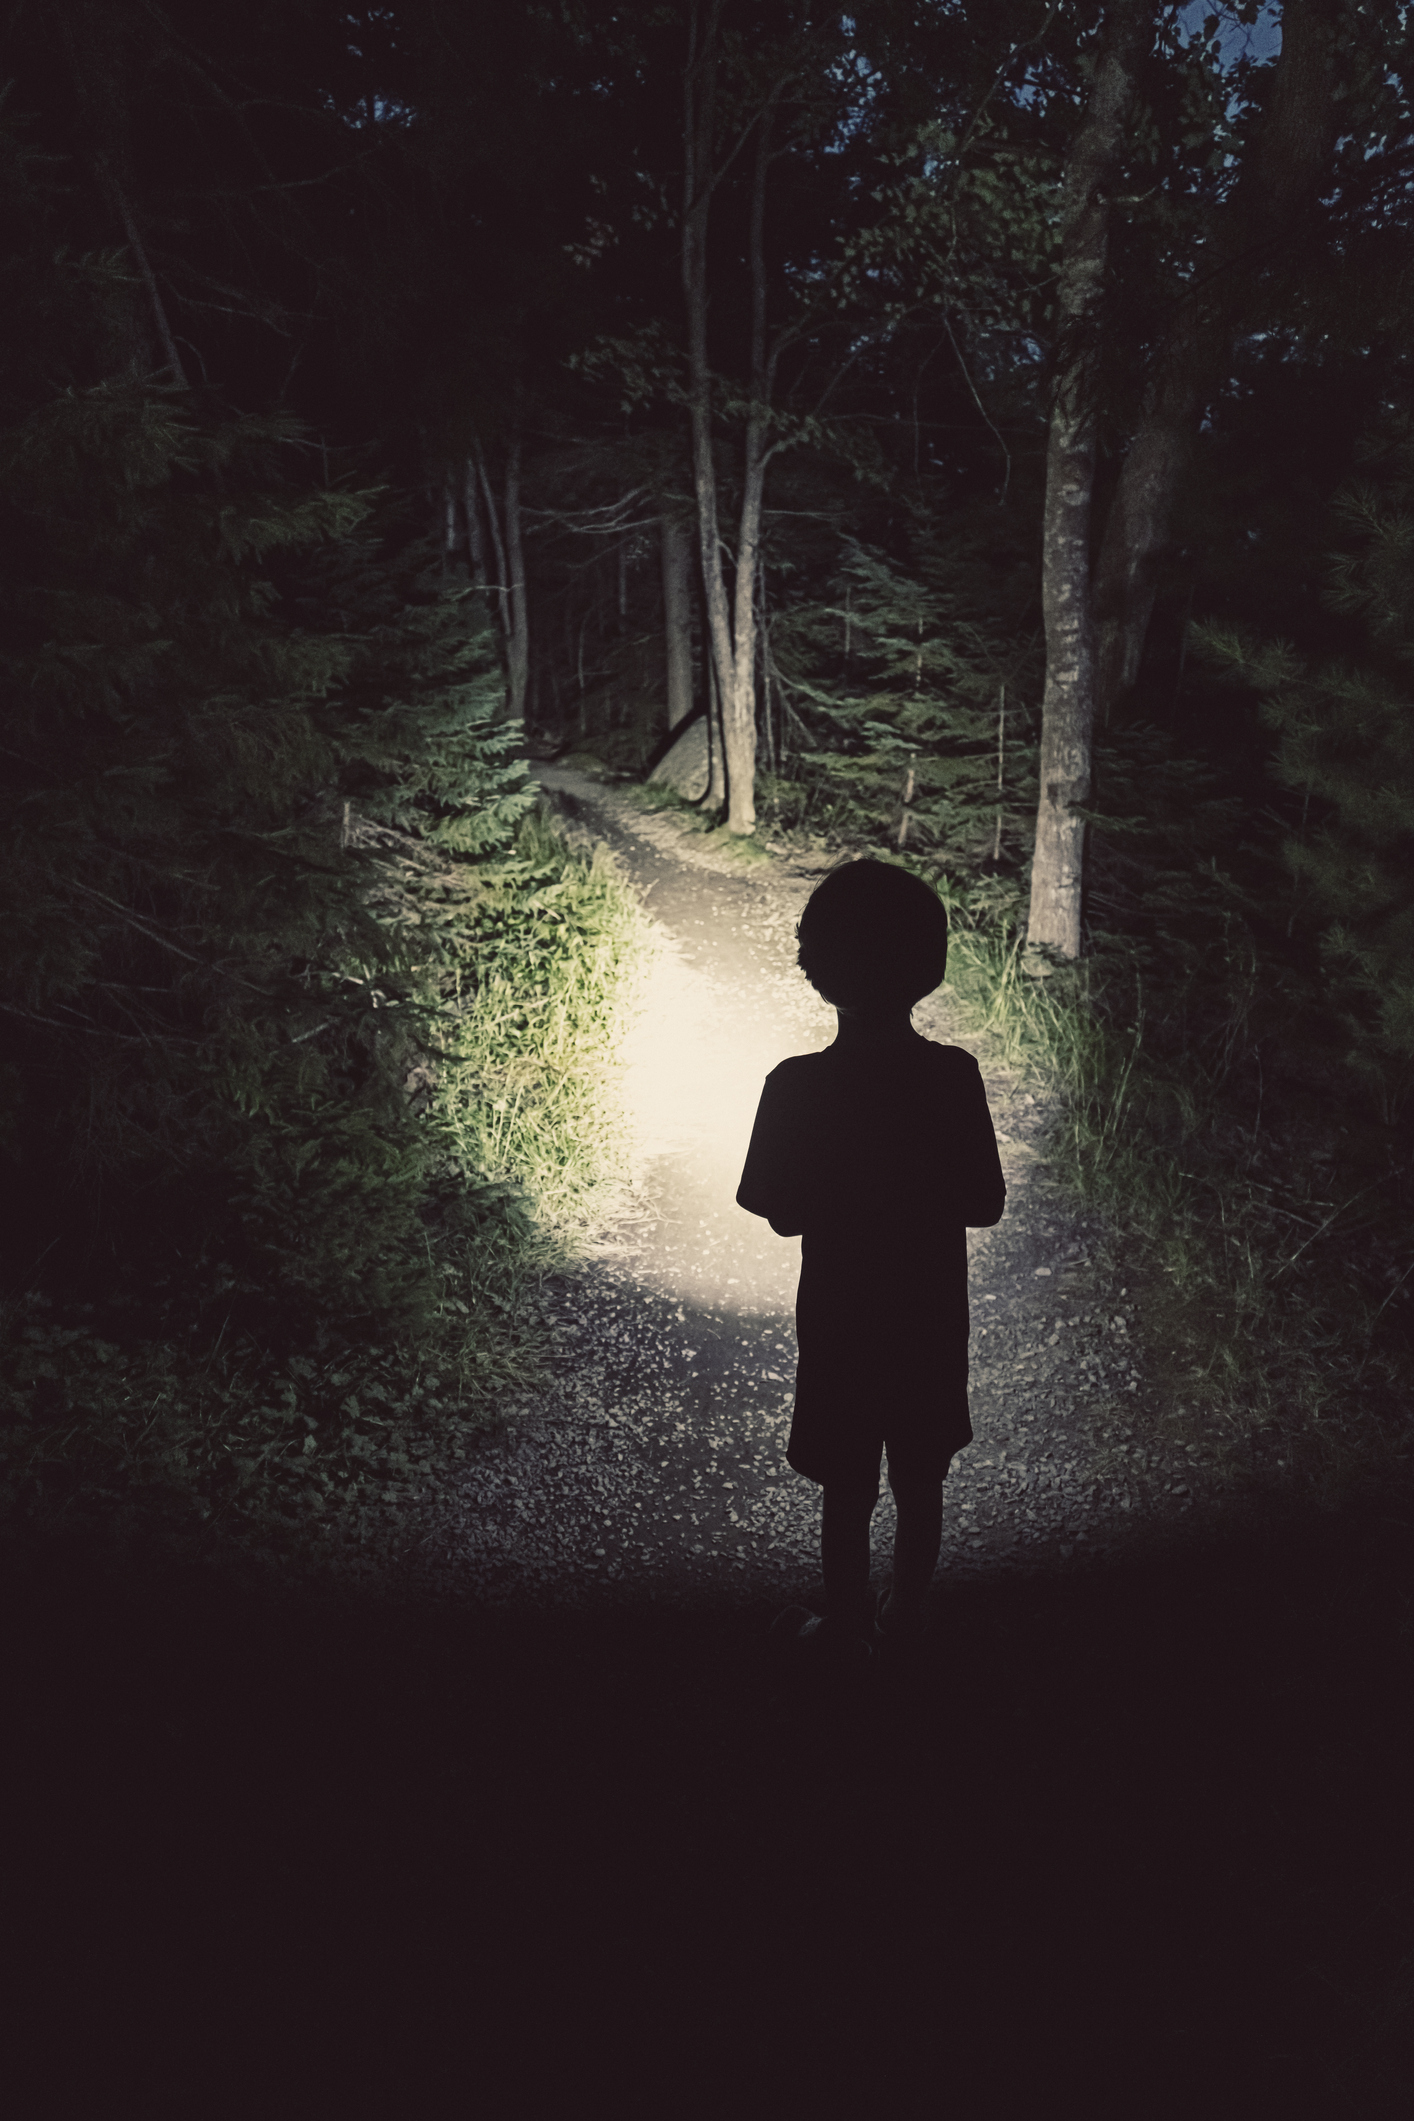 summer camp activities like flashlight tag can be played at night. A little boy stands in the dark holding a flashlight into the woods.